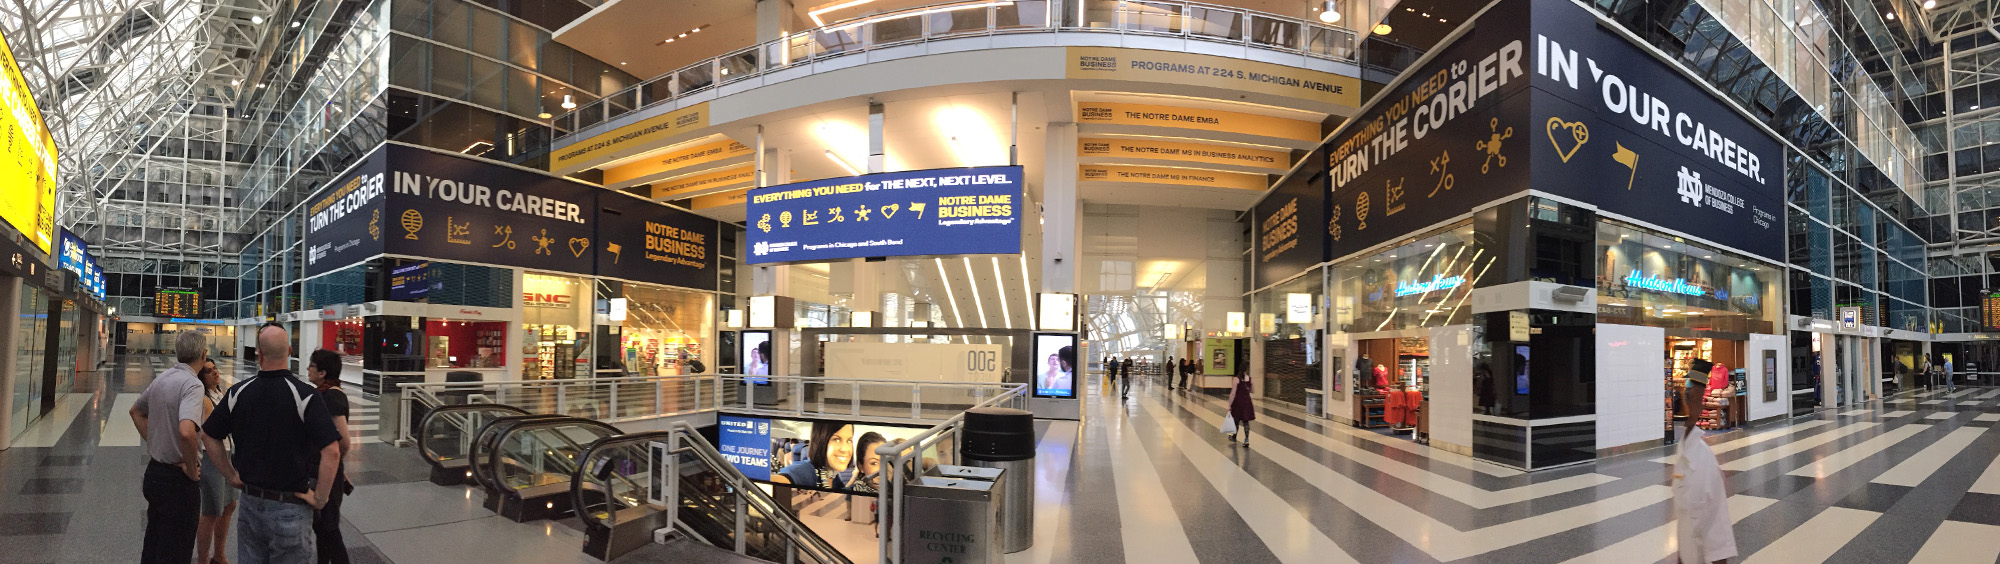 Panorama of Train station take-over. Creative with icon graphics. Turn the corner in your career.